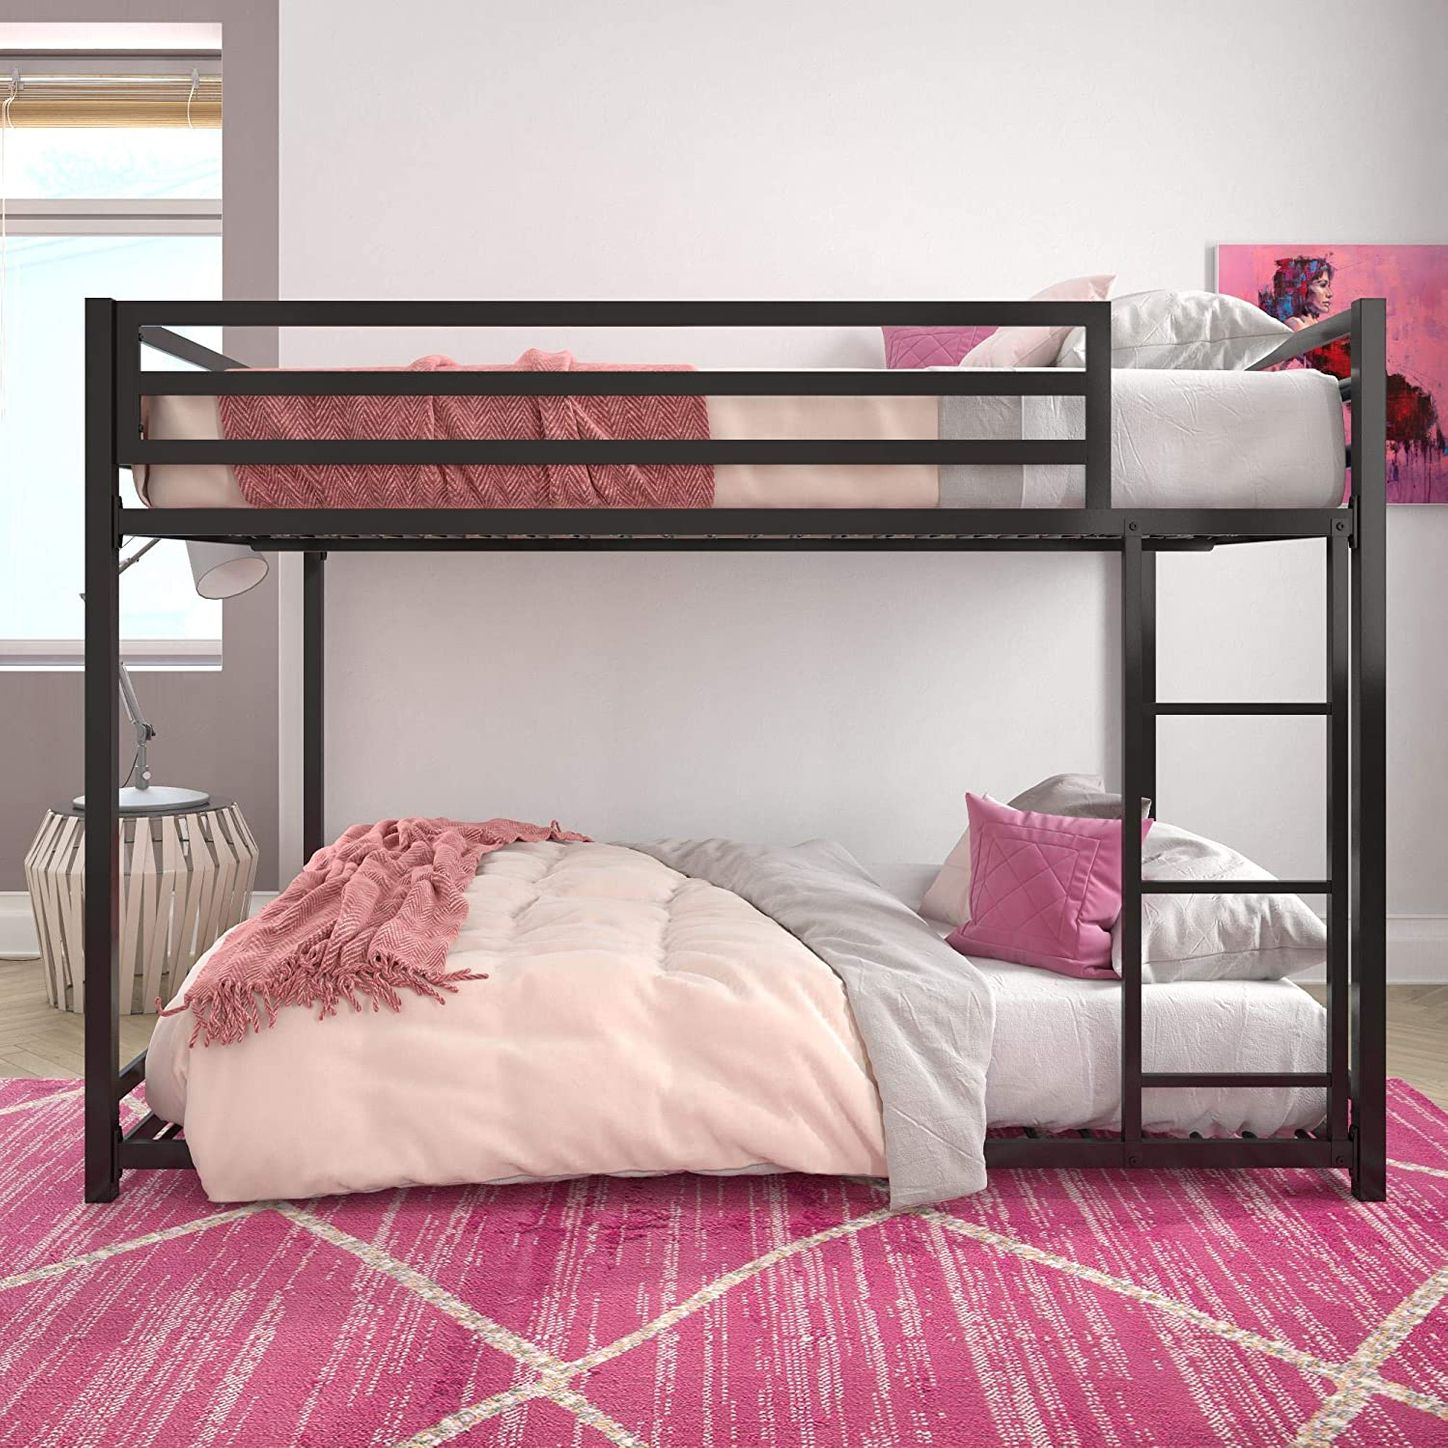 8 Best Bunk Beds 2020 The Strategist, Full Size Bunk Bed Bedding